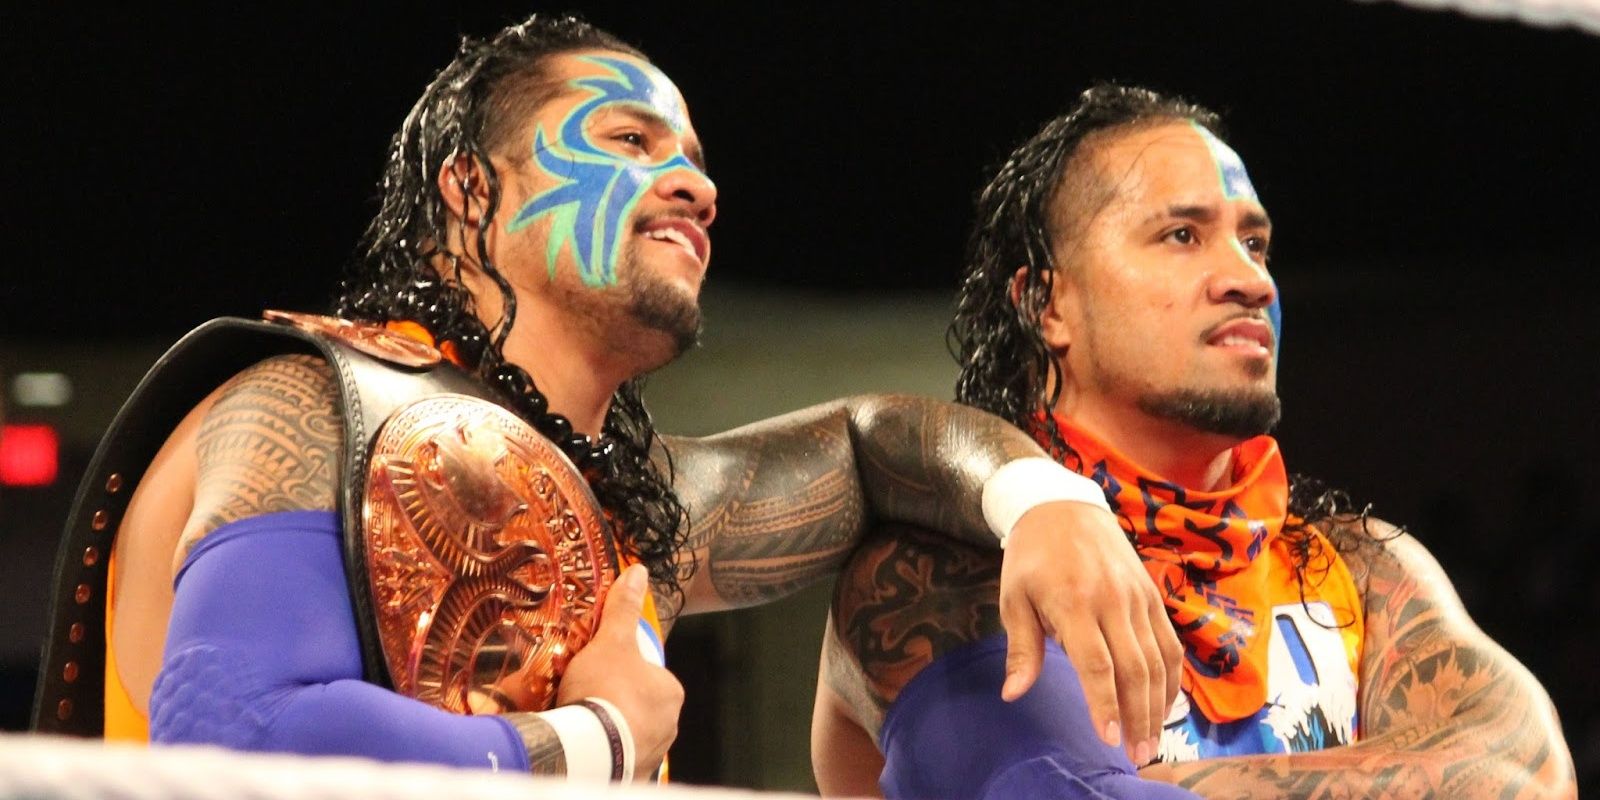 Usos Young Tag Team Champions